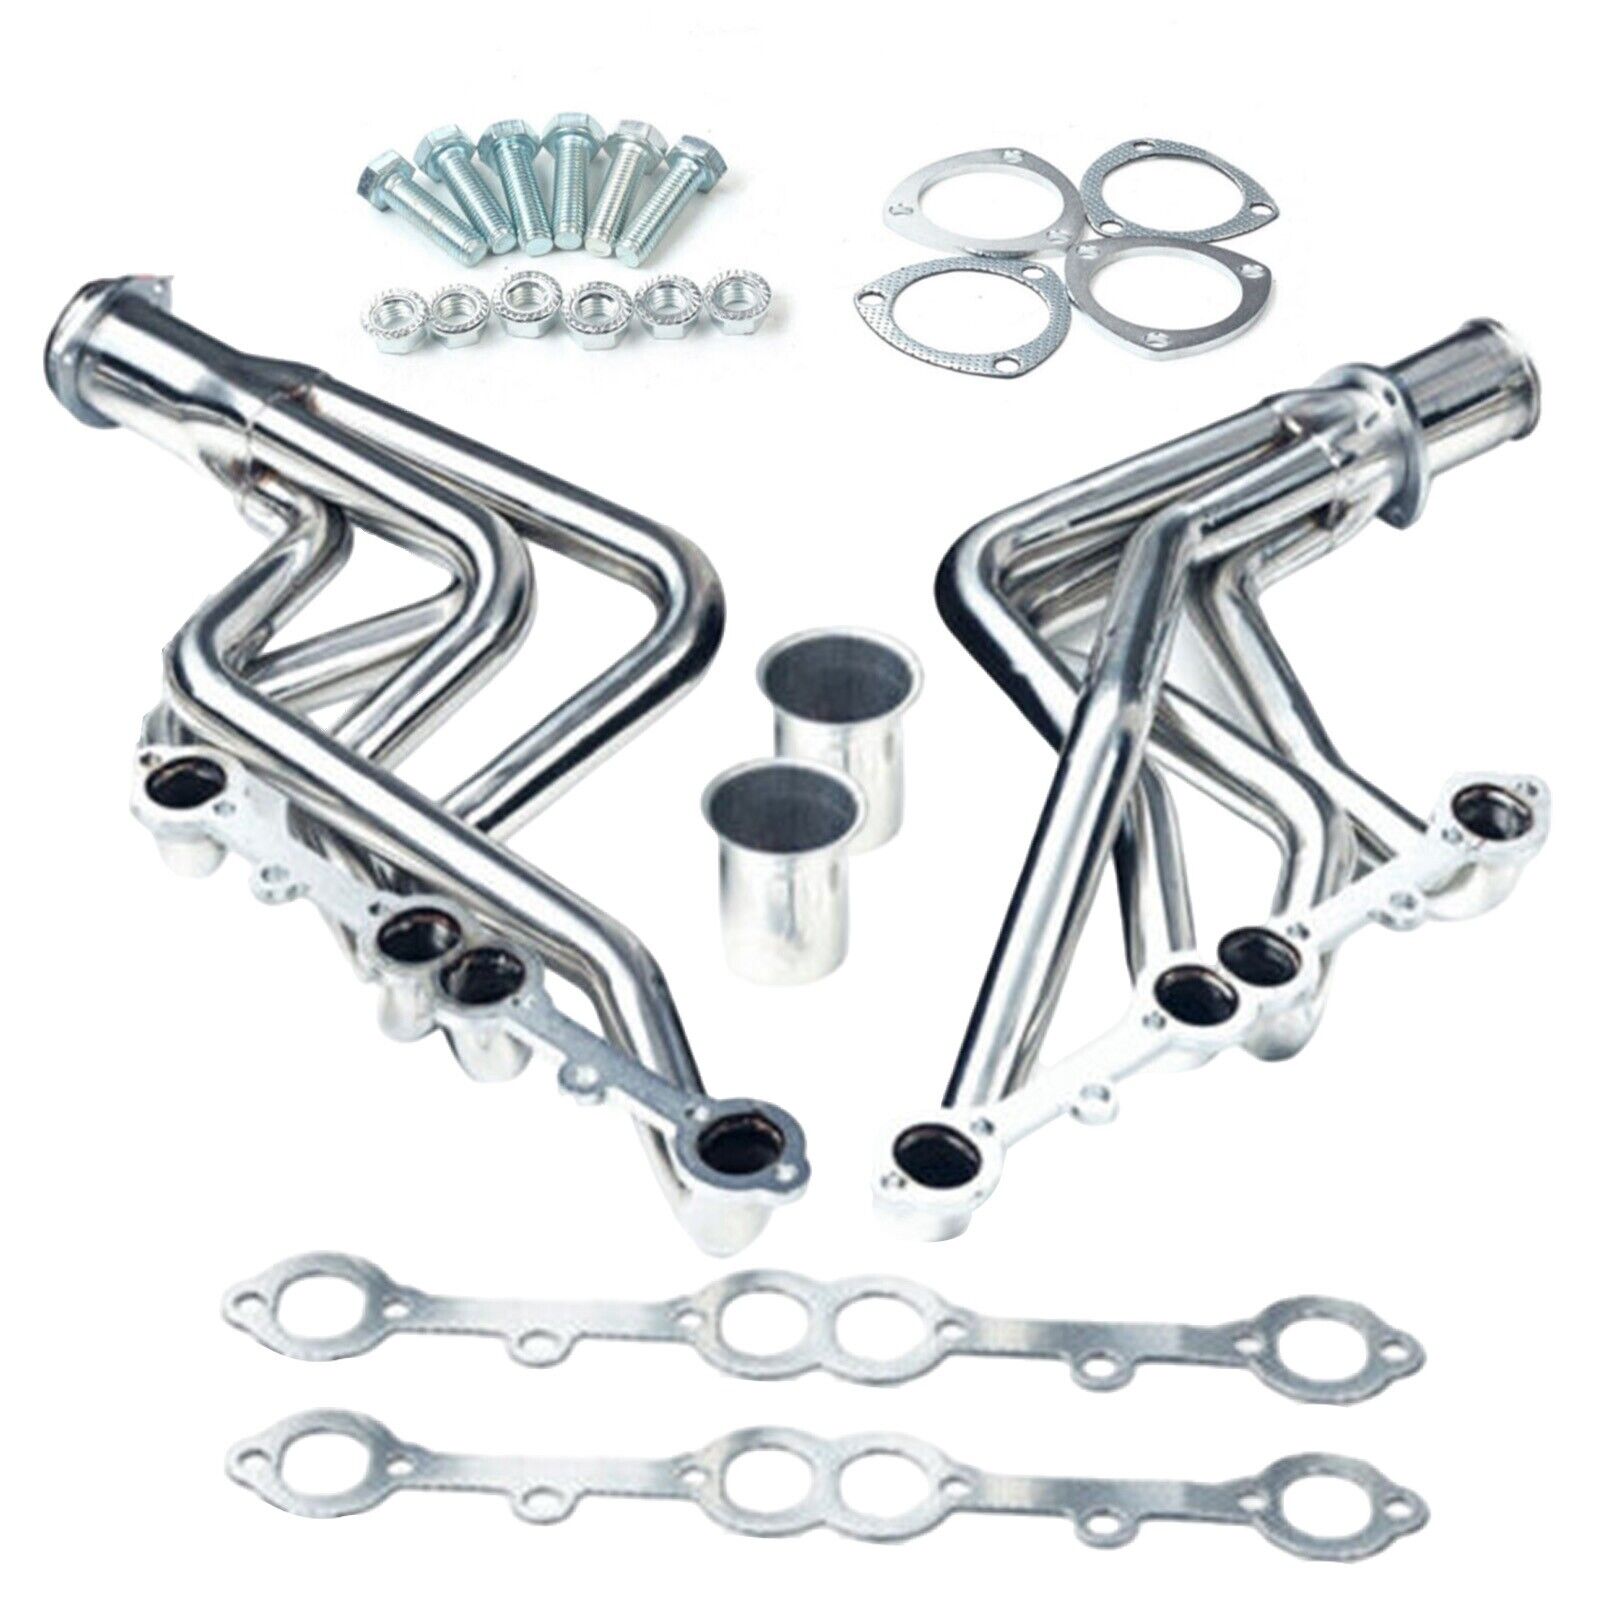 Stainless Steel Headers for Chevy Truck Blazer Suburban 2wd/4wd 1973-1985